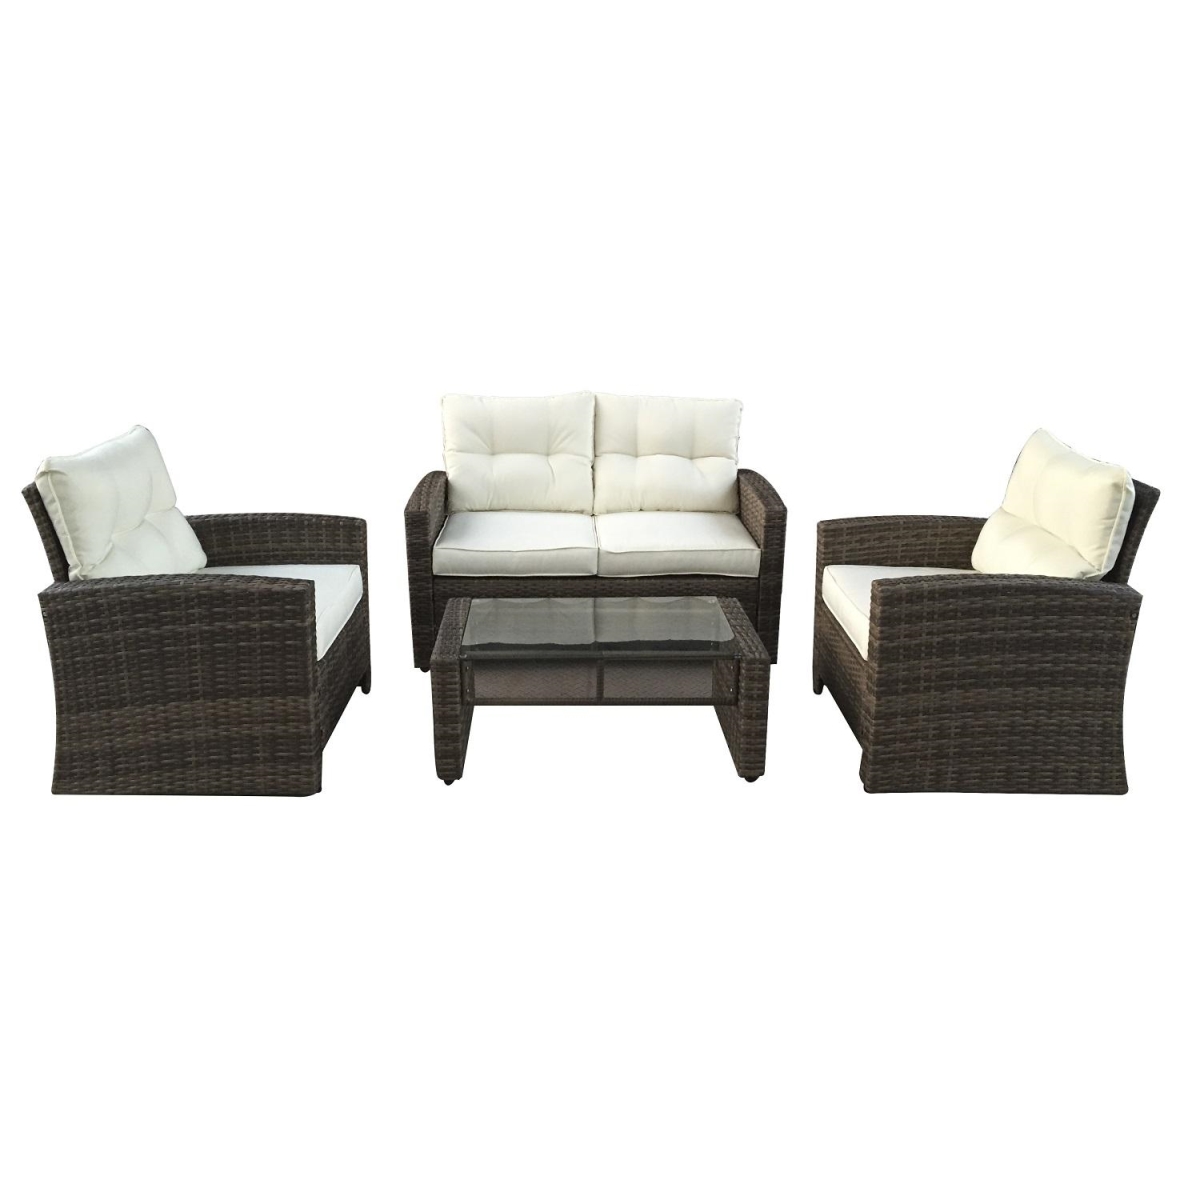 32591333 4 Piece Two-tone Brown Rattan Outdoor Patio Furniture Set - Beige Cushions